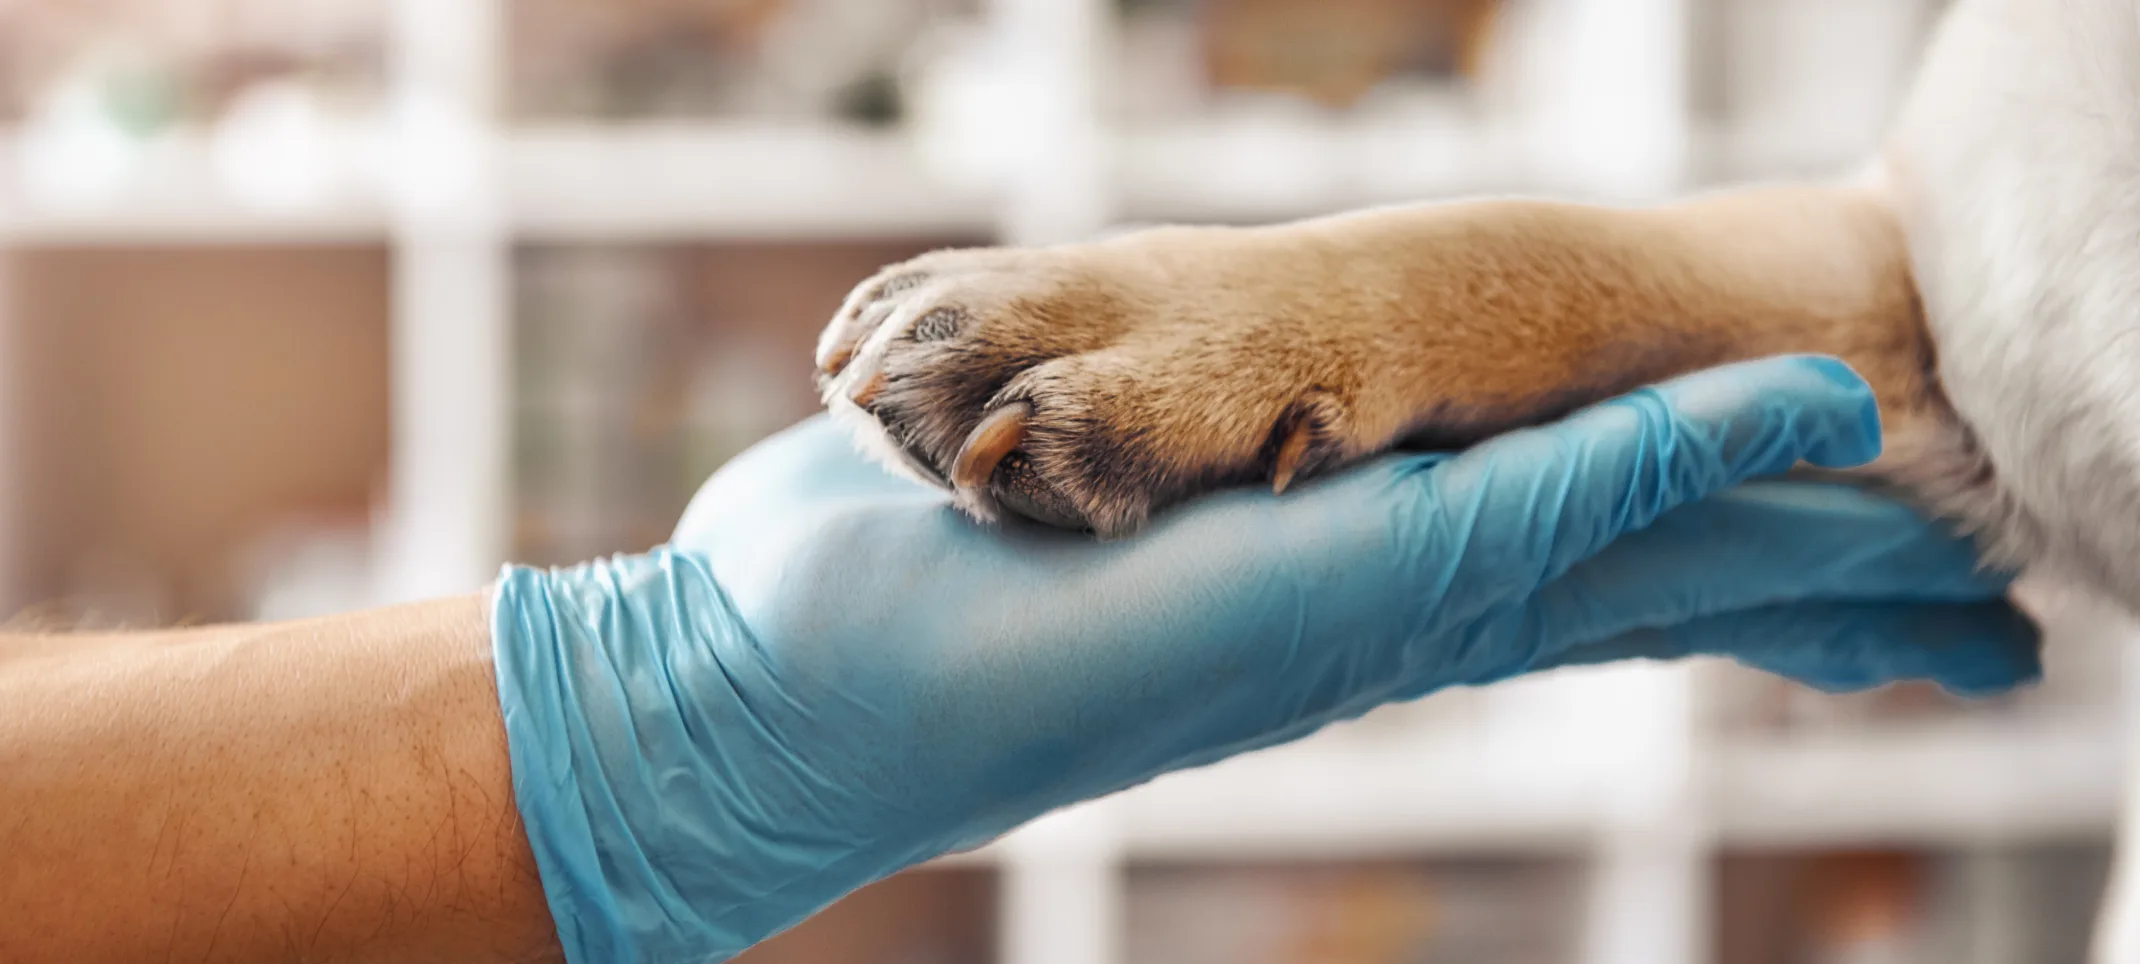 Surgical Gloves Holding Paw